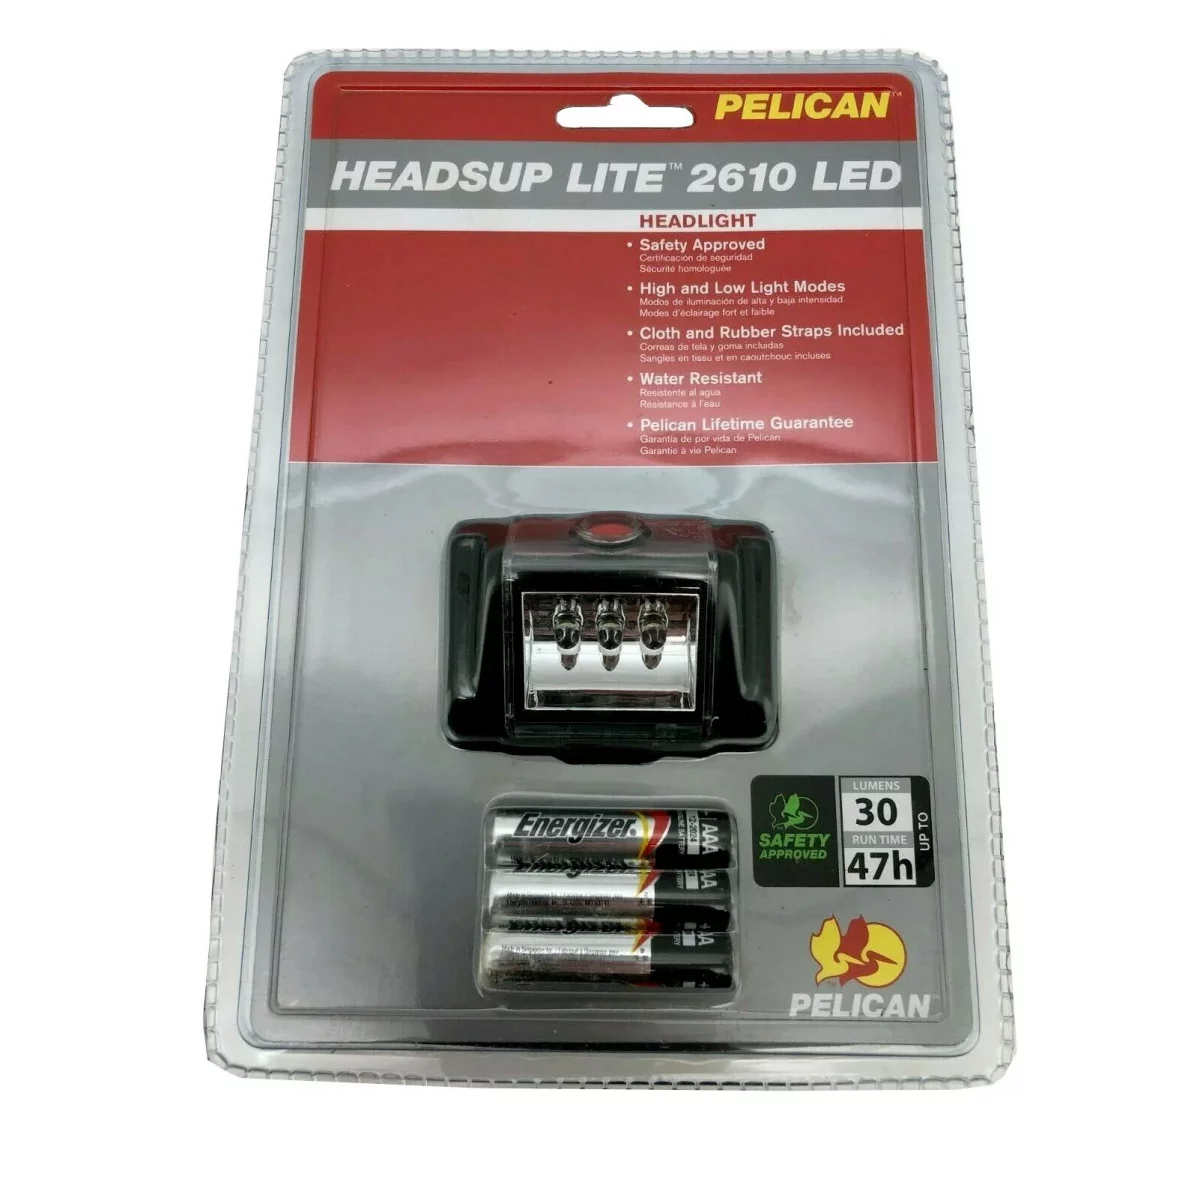 Pelican Headsup LED Headlight / 2610 / Adjustable / Water Resistant / Safety Approved